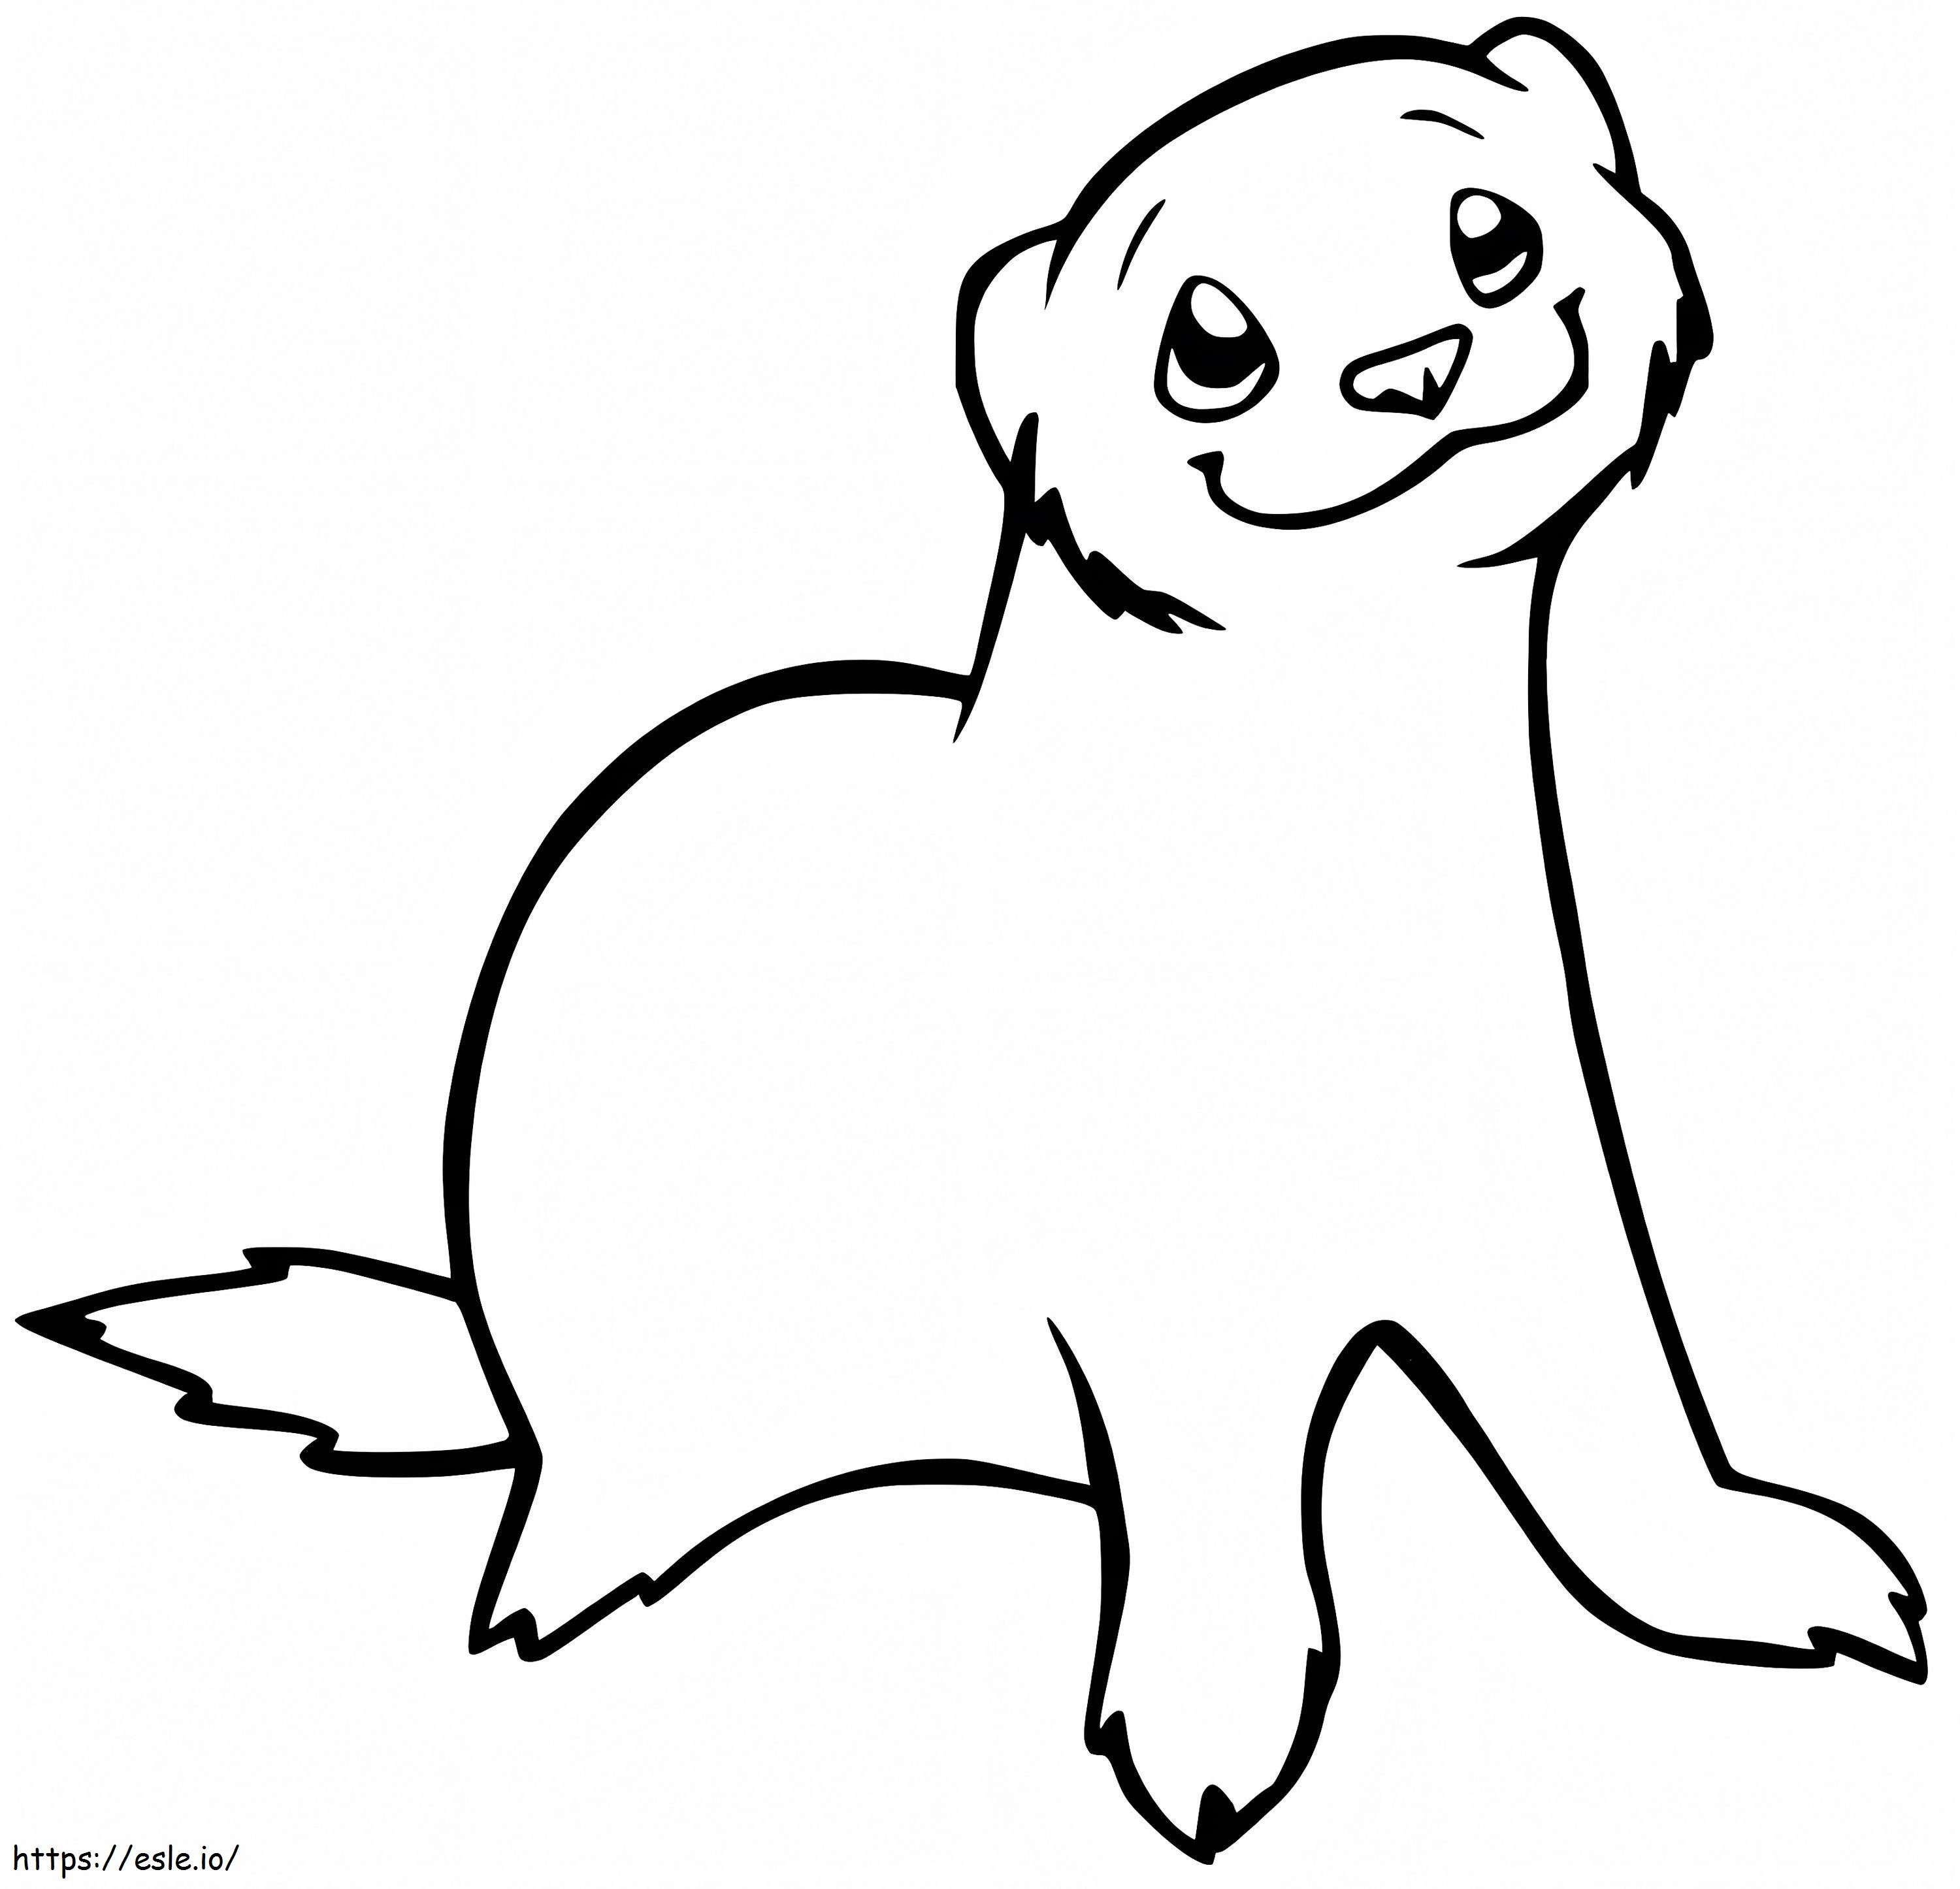 Cute Ferret coloring page